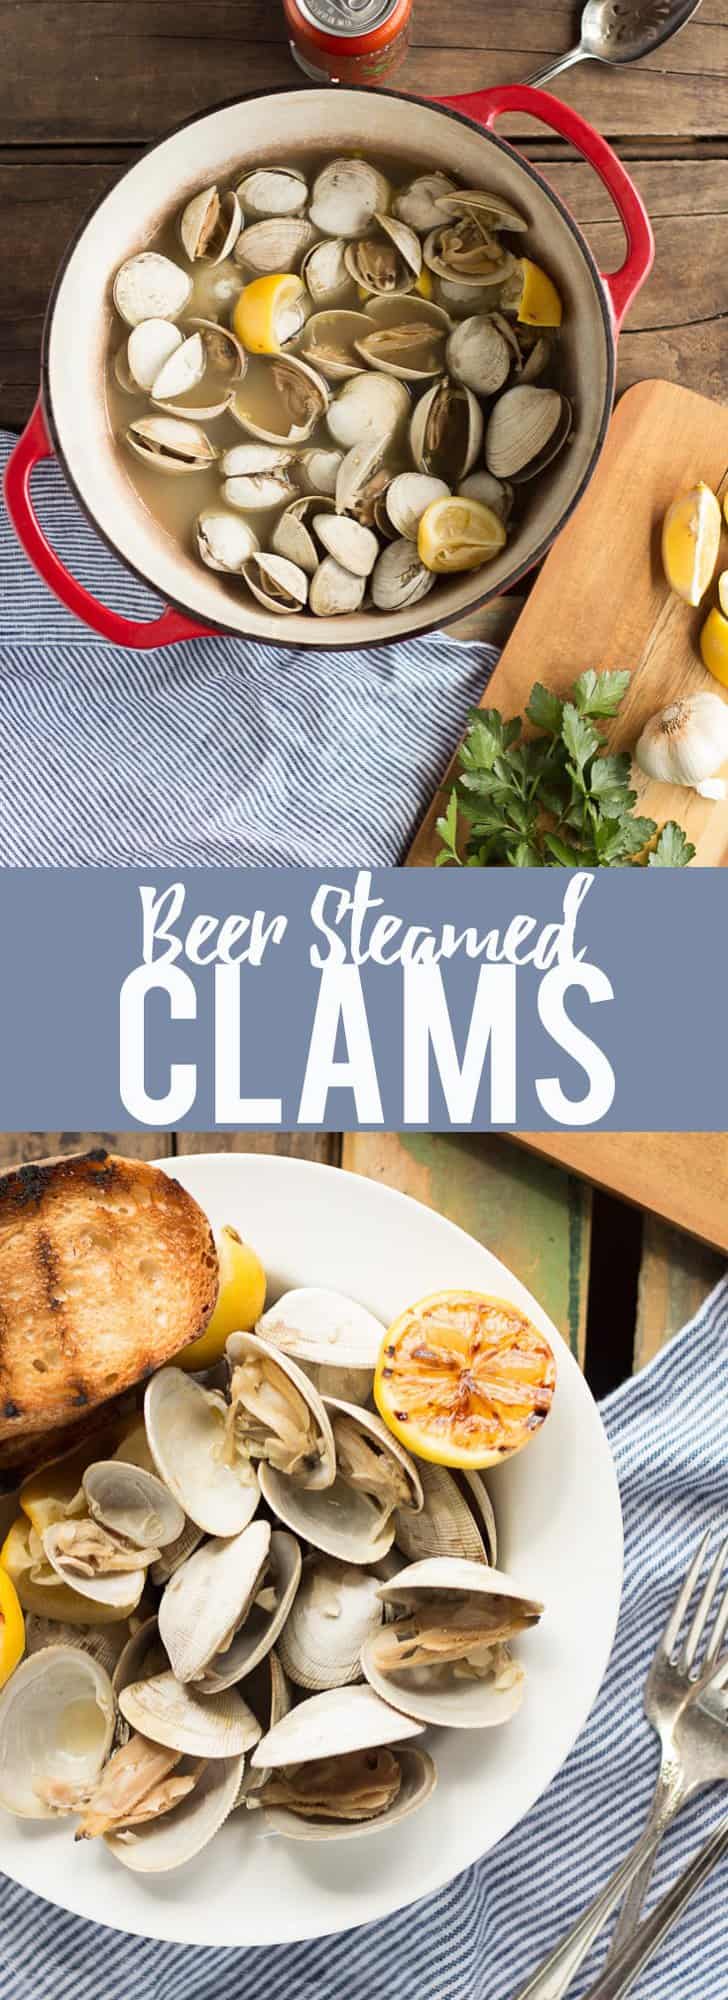 Learn how to make this simple recipe for Beer Steamed Clams - so easy you can even make them on the campfire!